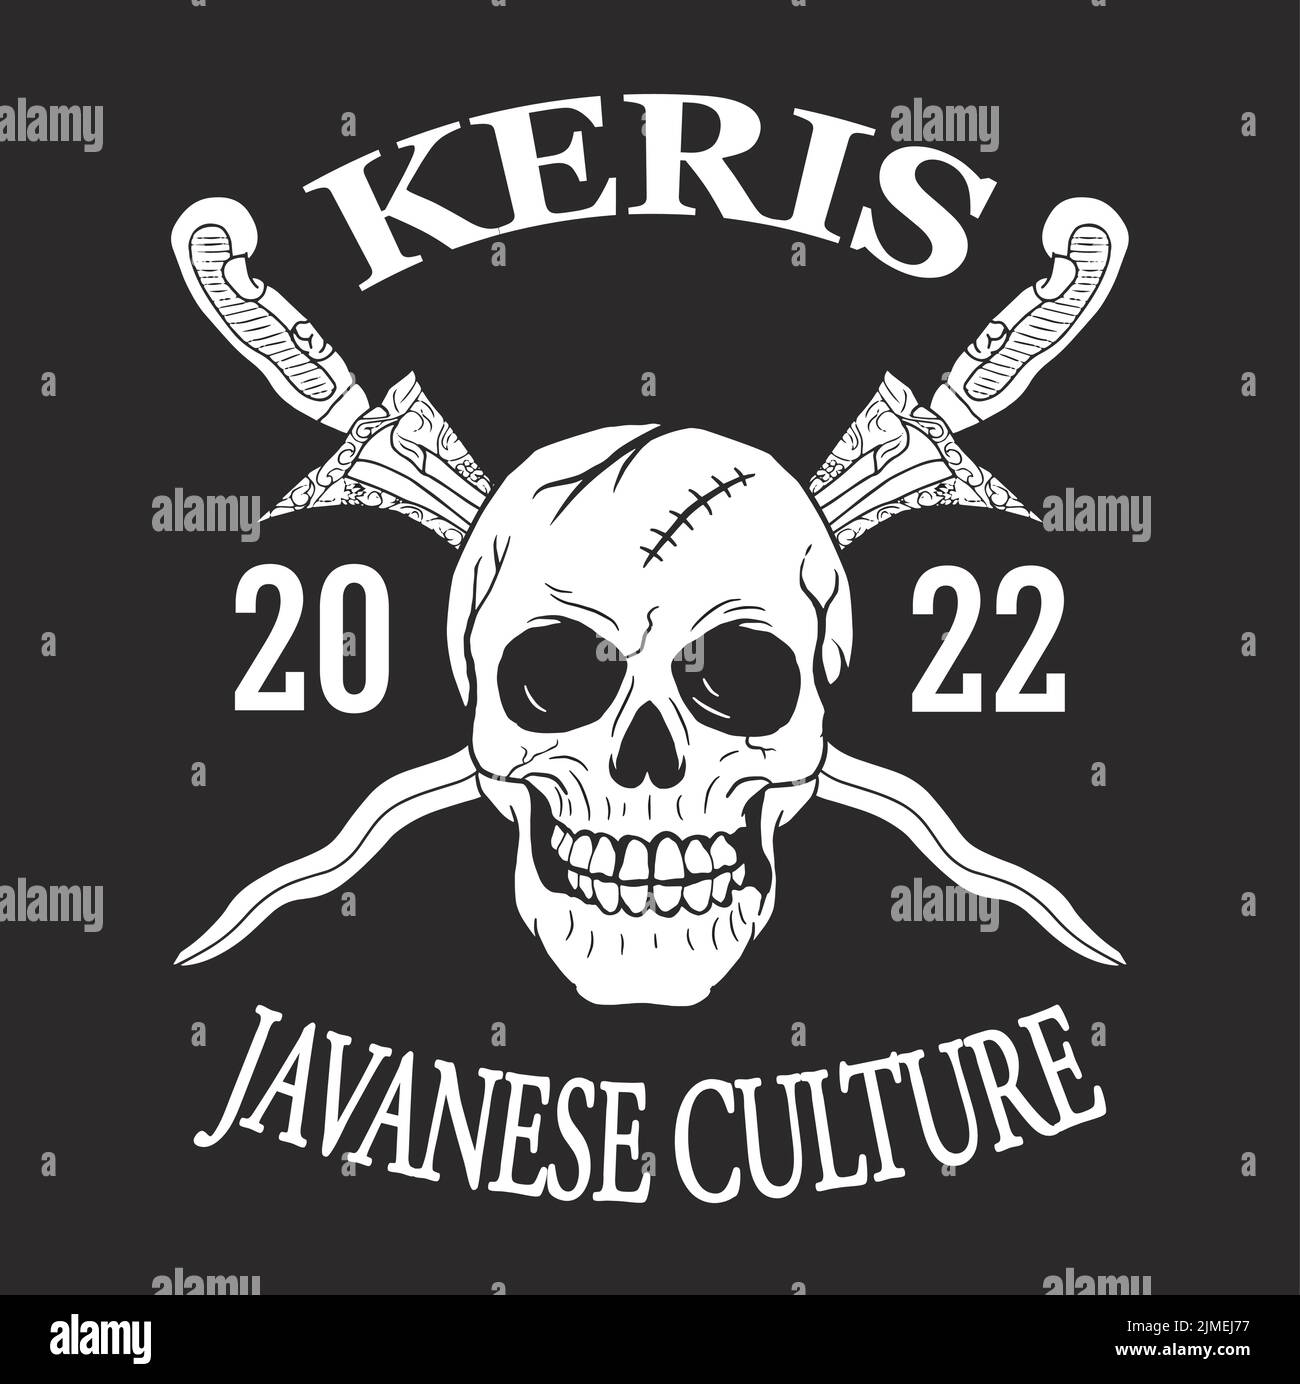 javanese culture - vintage logo templates. Javanese culture logo with keris and skull. Vector illustration Stock Vector